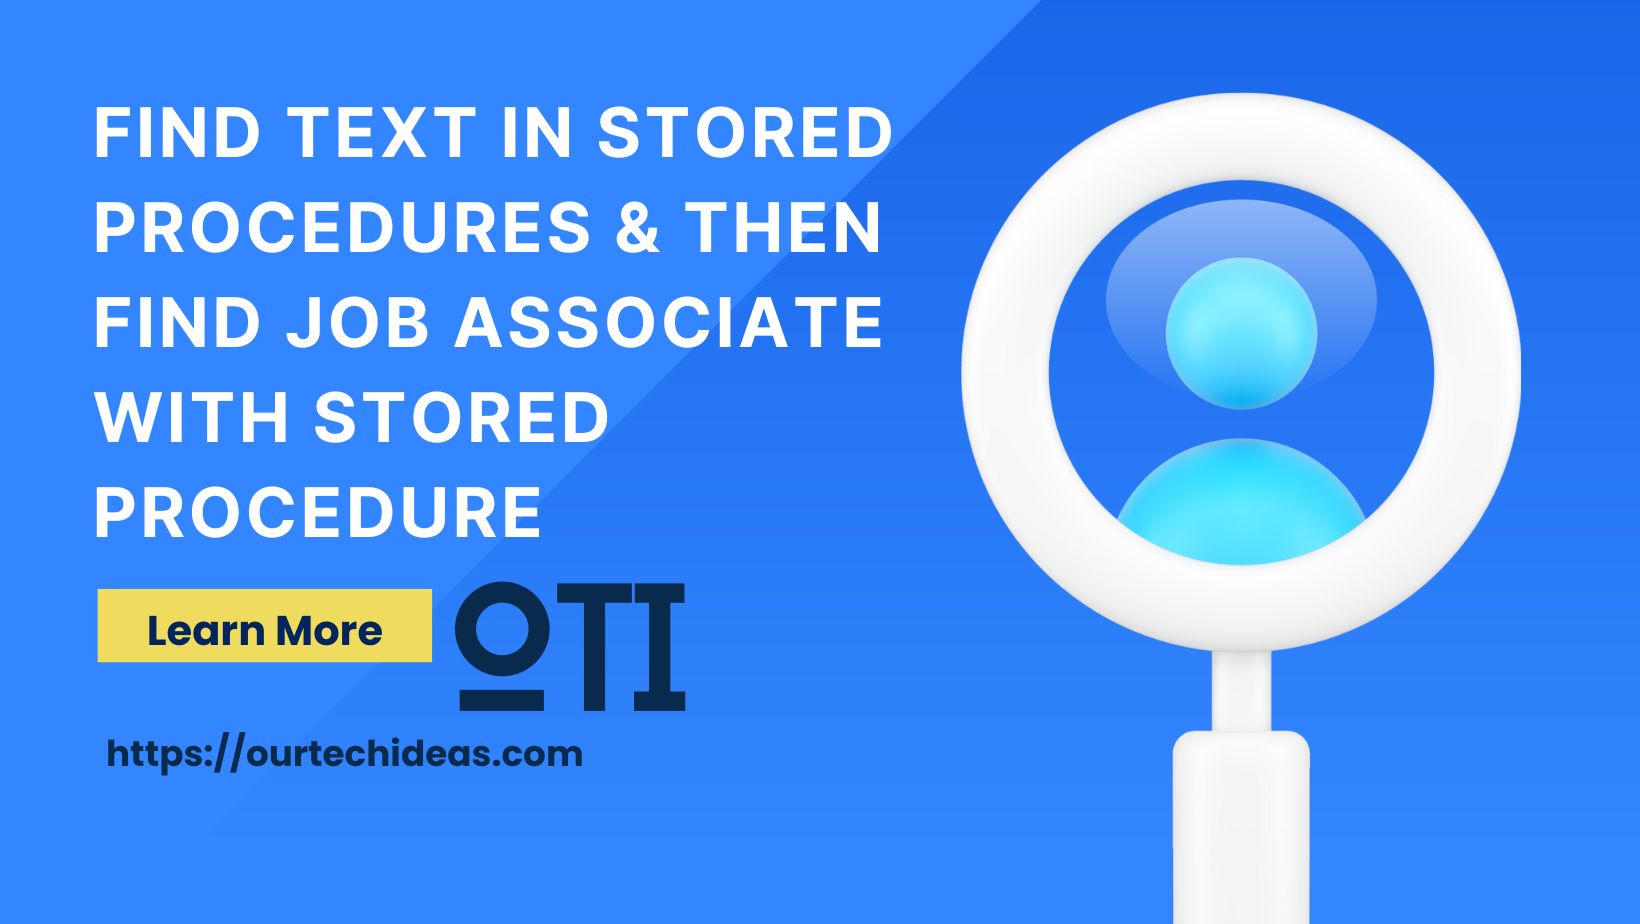 Find text in Stored Procedures & then find JOB associate with Stored Procedure